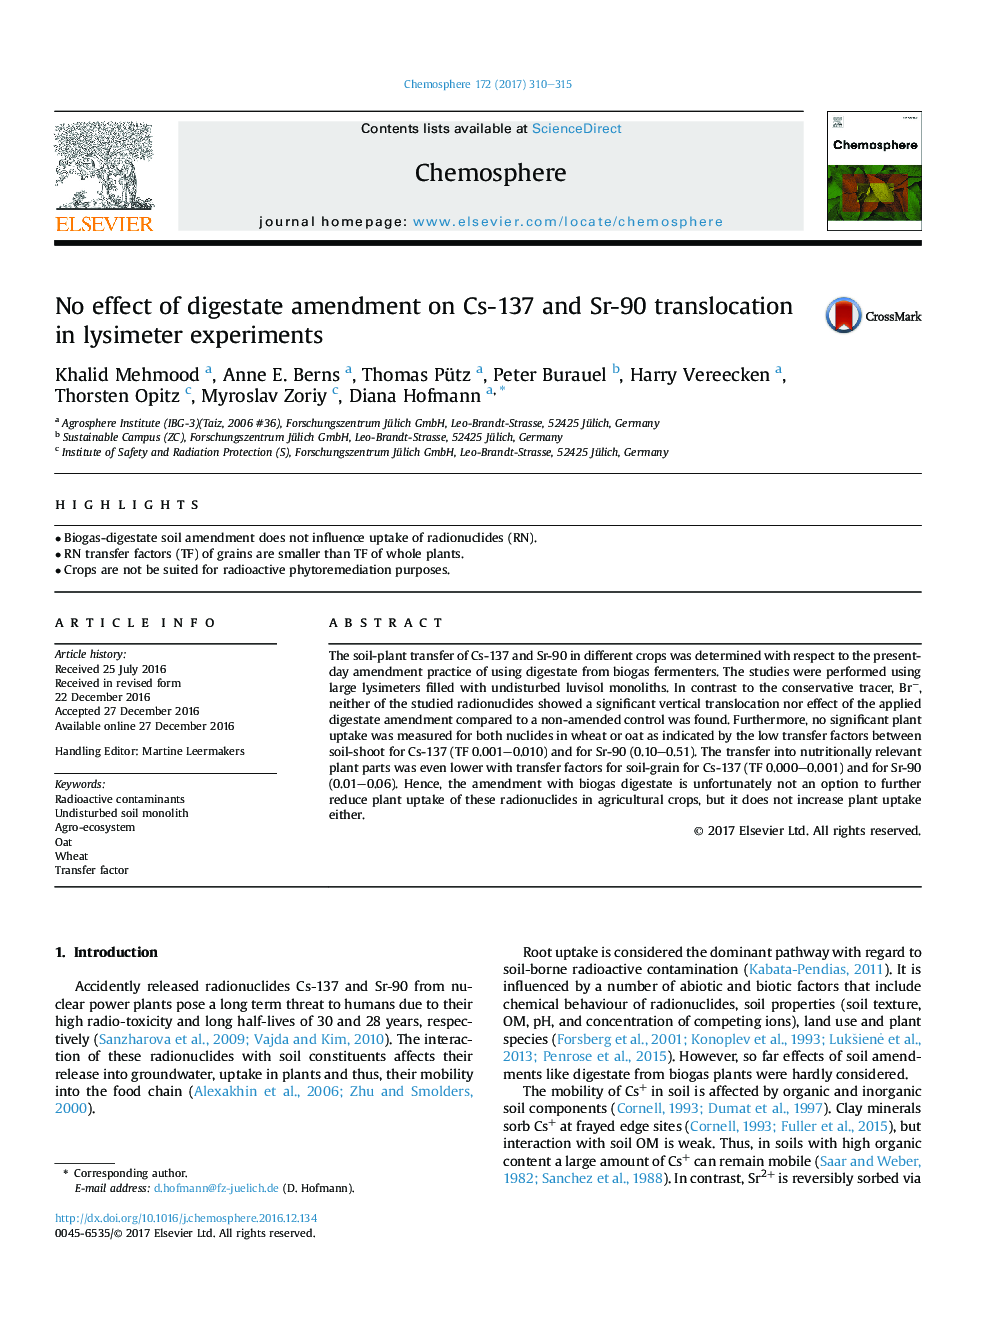 No effect of digestate amendment on Cs-137 and Sr-90 translocation in lysimeter experiments